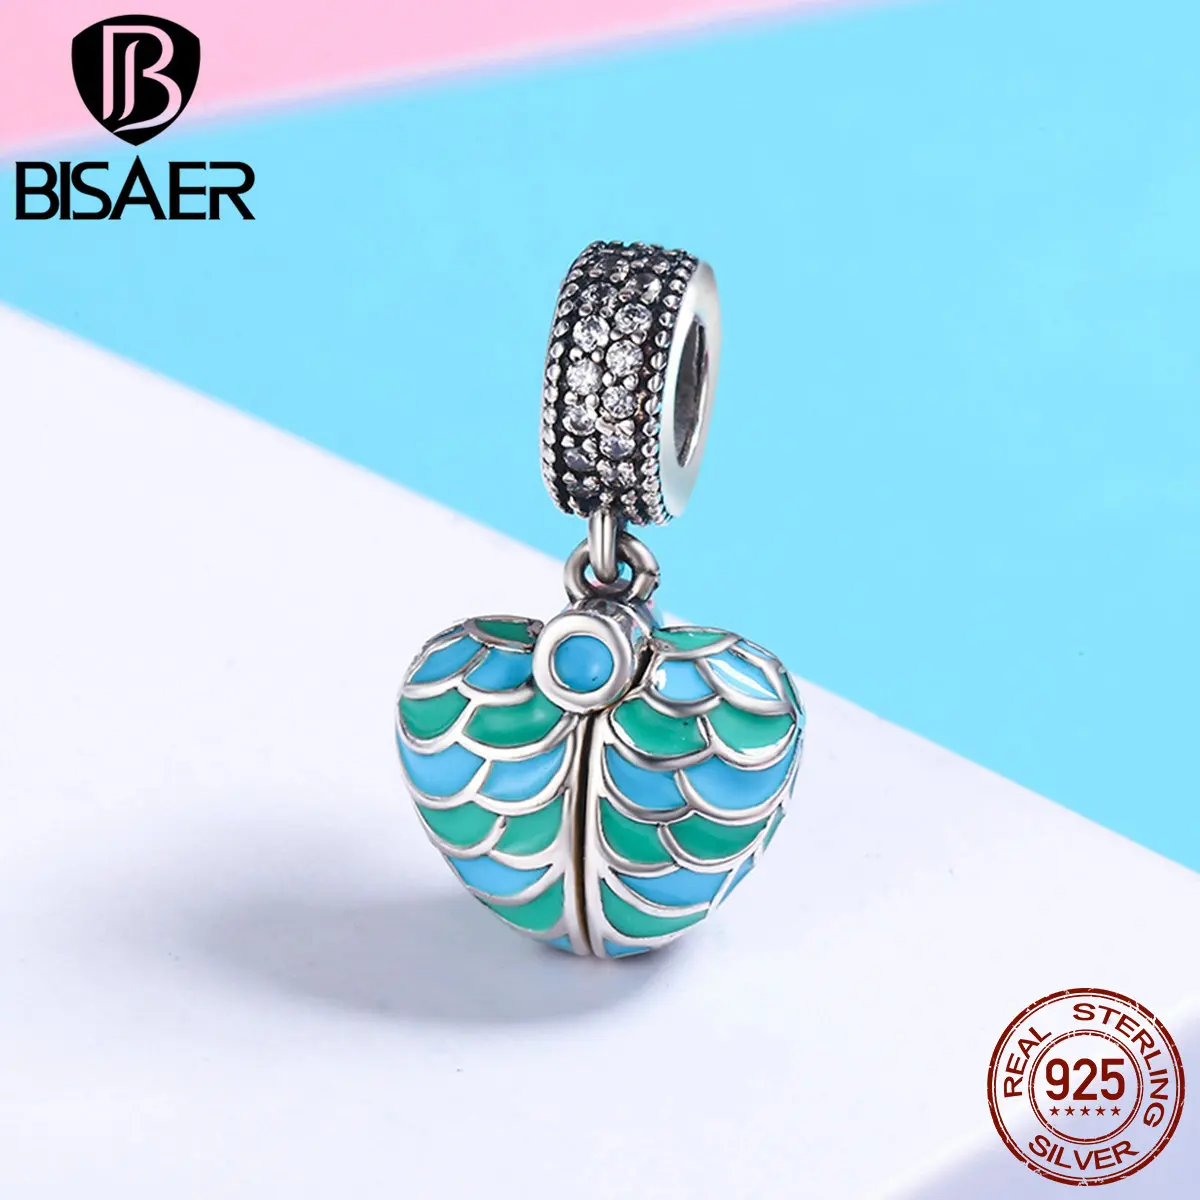 

BISAER Authentic 925 Sterling Silver Forever Love Engrave Open Heart Pendant Charm fit Charm Bracelet Jewelry Valentine Day Gift